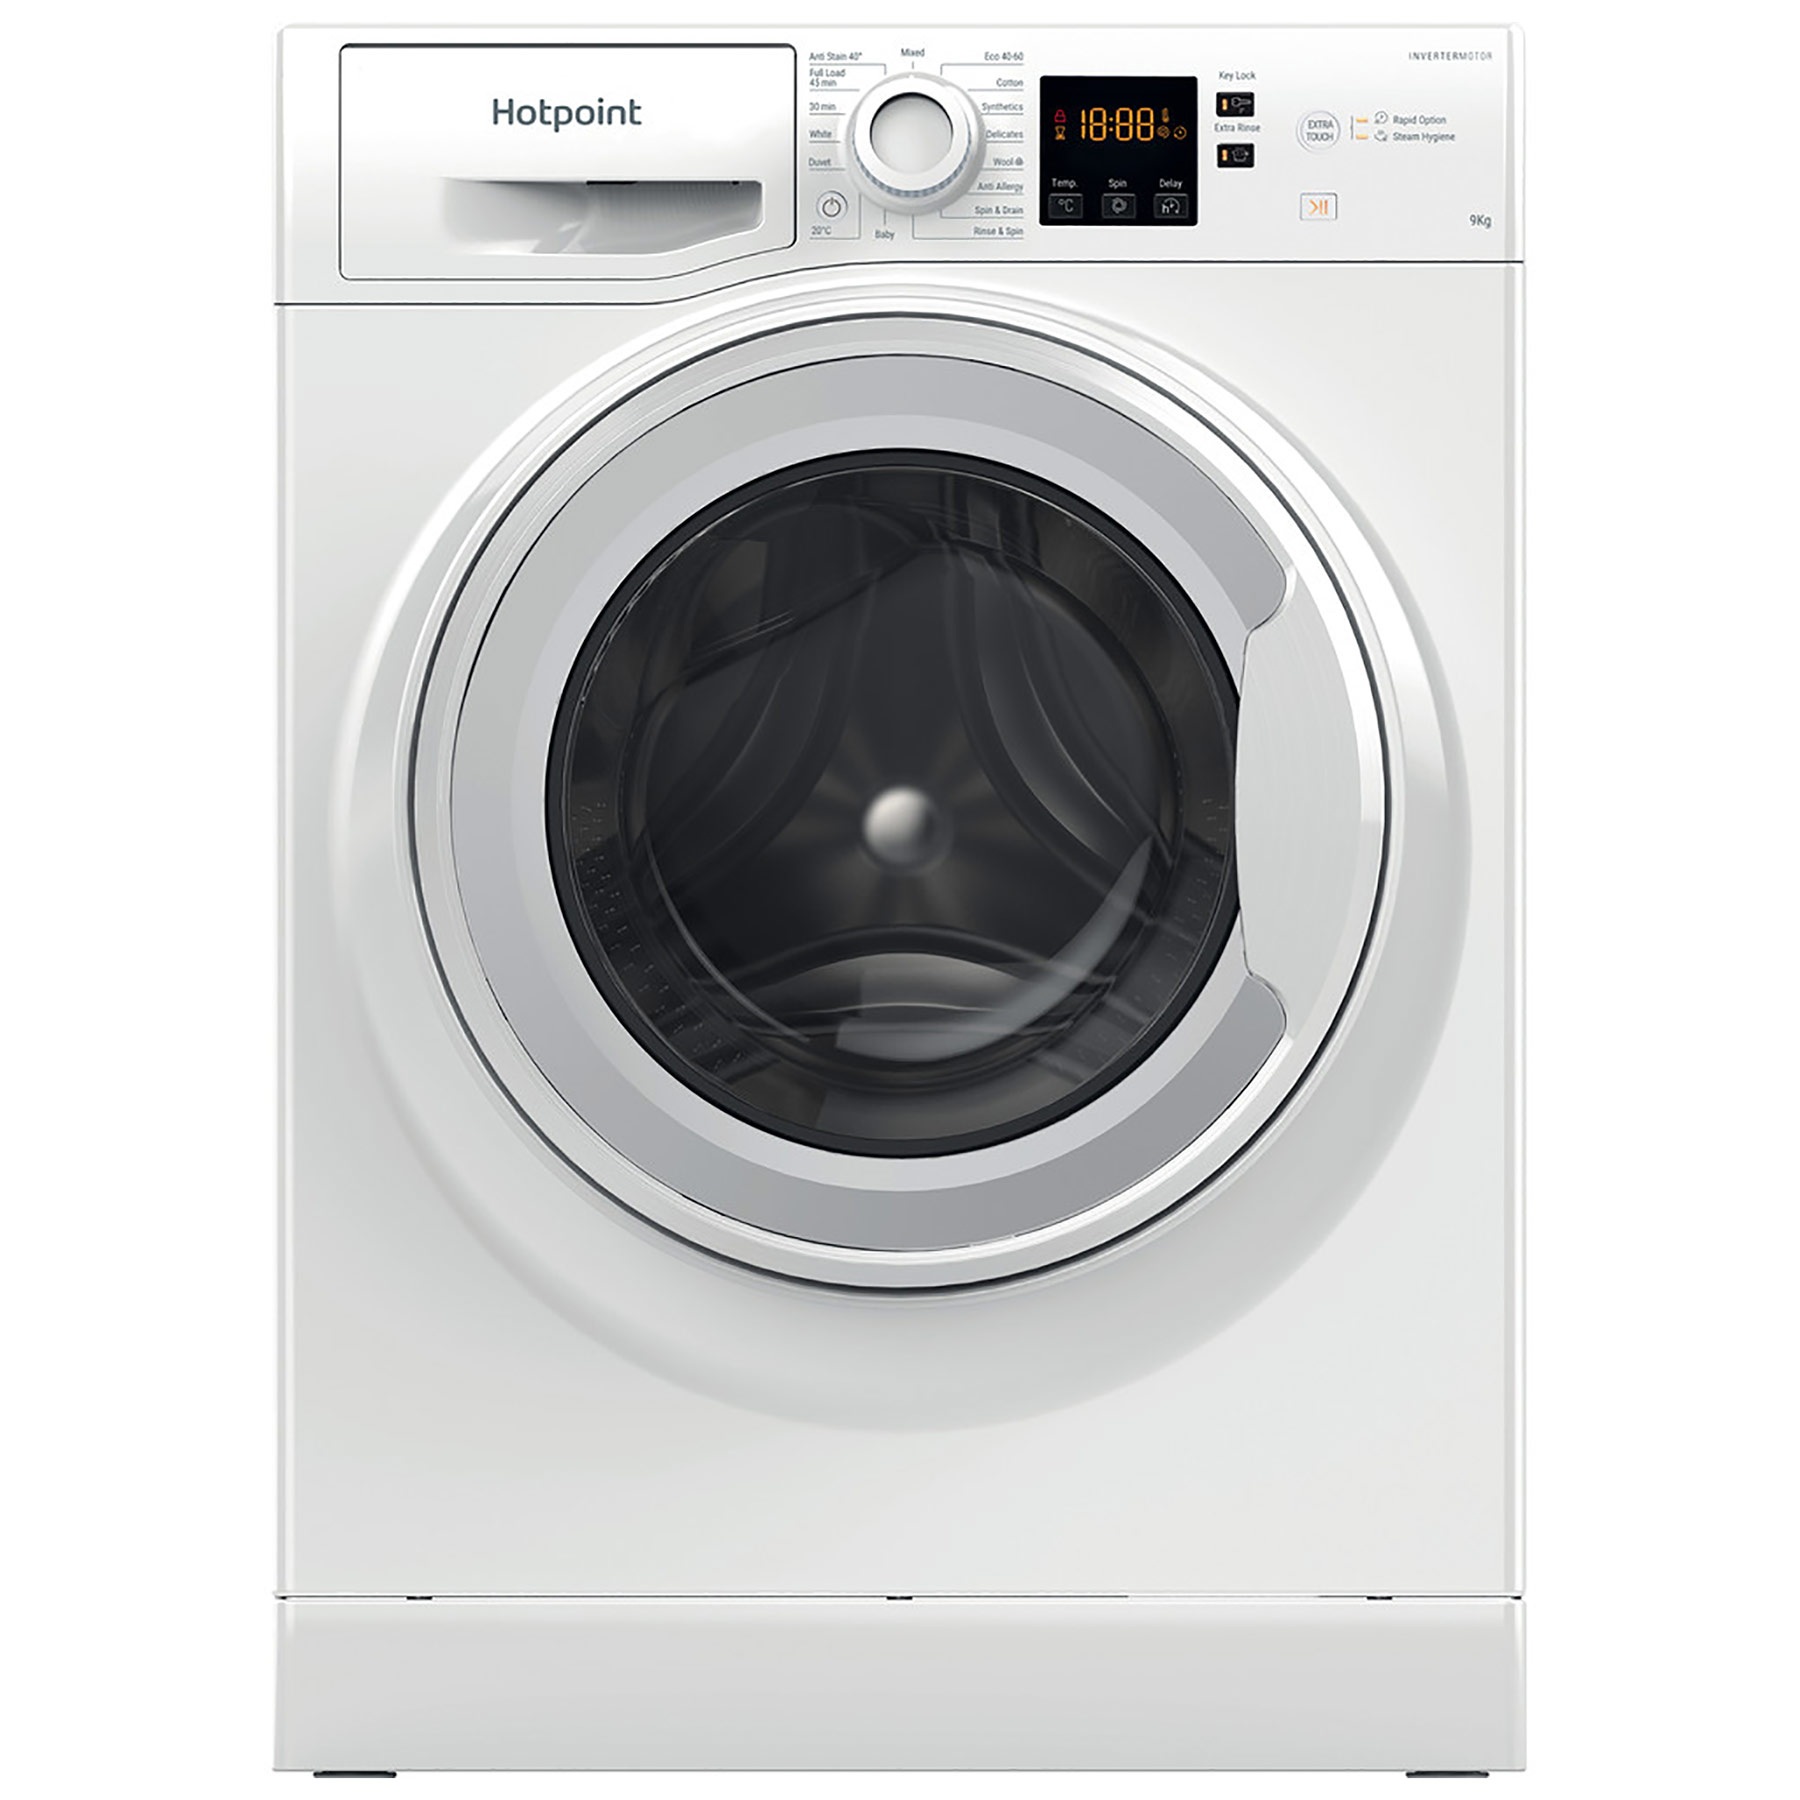 Hotpoint NSWF945CWUKN Washing Machine in White 1400rpm 9Kg B Rated